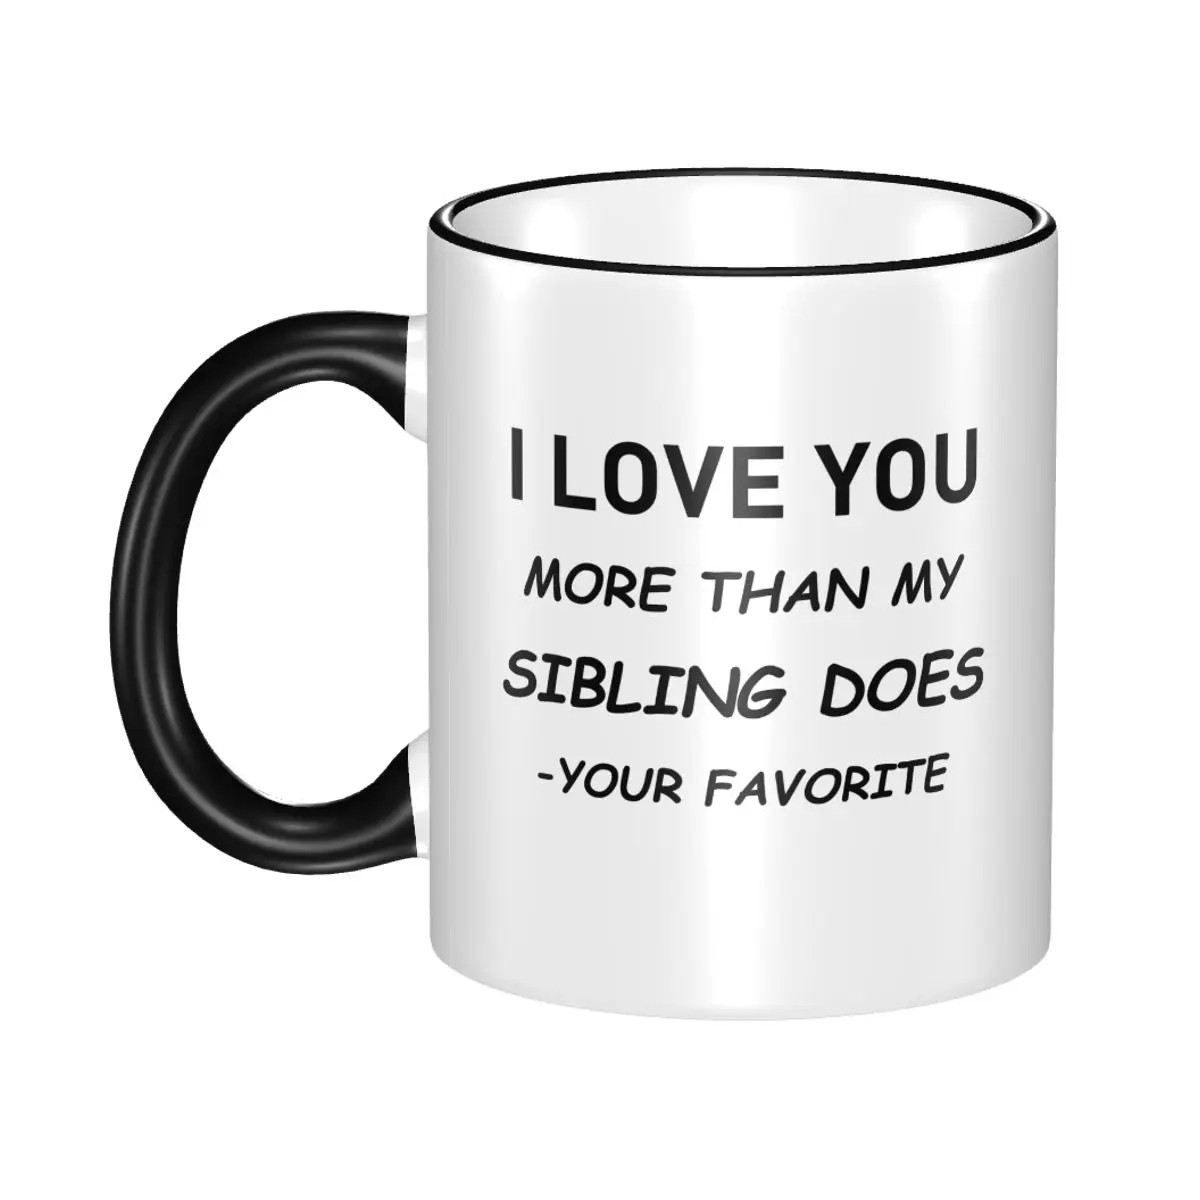 

Fathers Day Dad Gifts From Daughter Son - I Love You More Your Favorite Funny Cup Porcelain Coffee Mug Tea Cup 11oz Ceramic Mugs